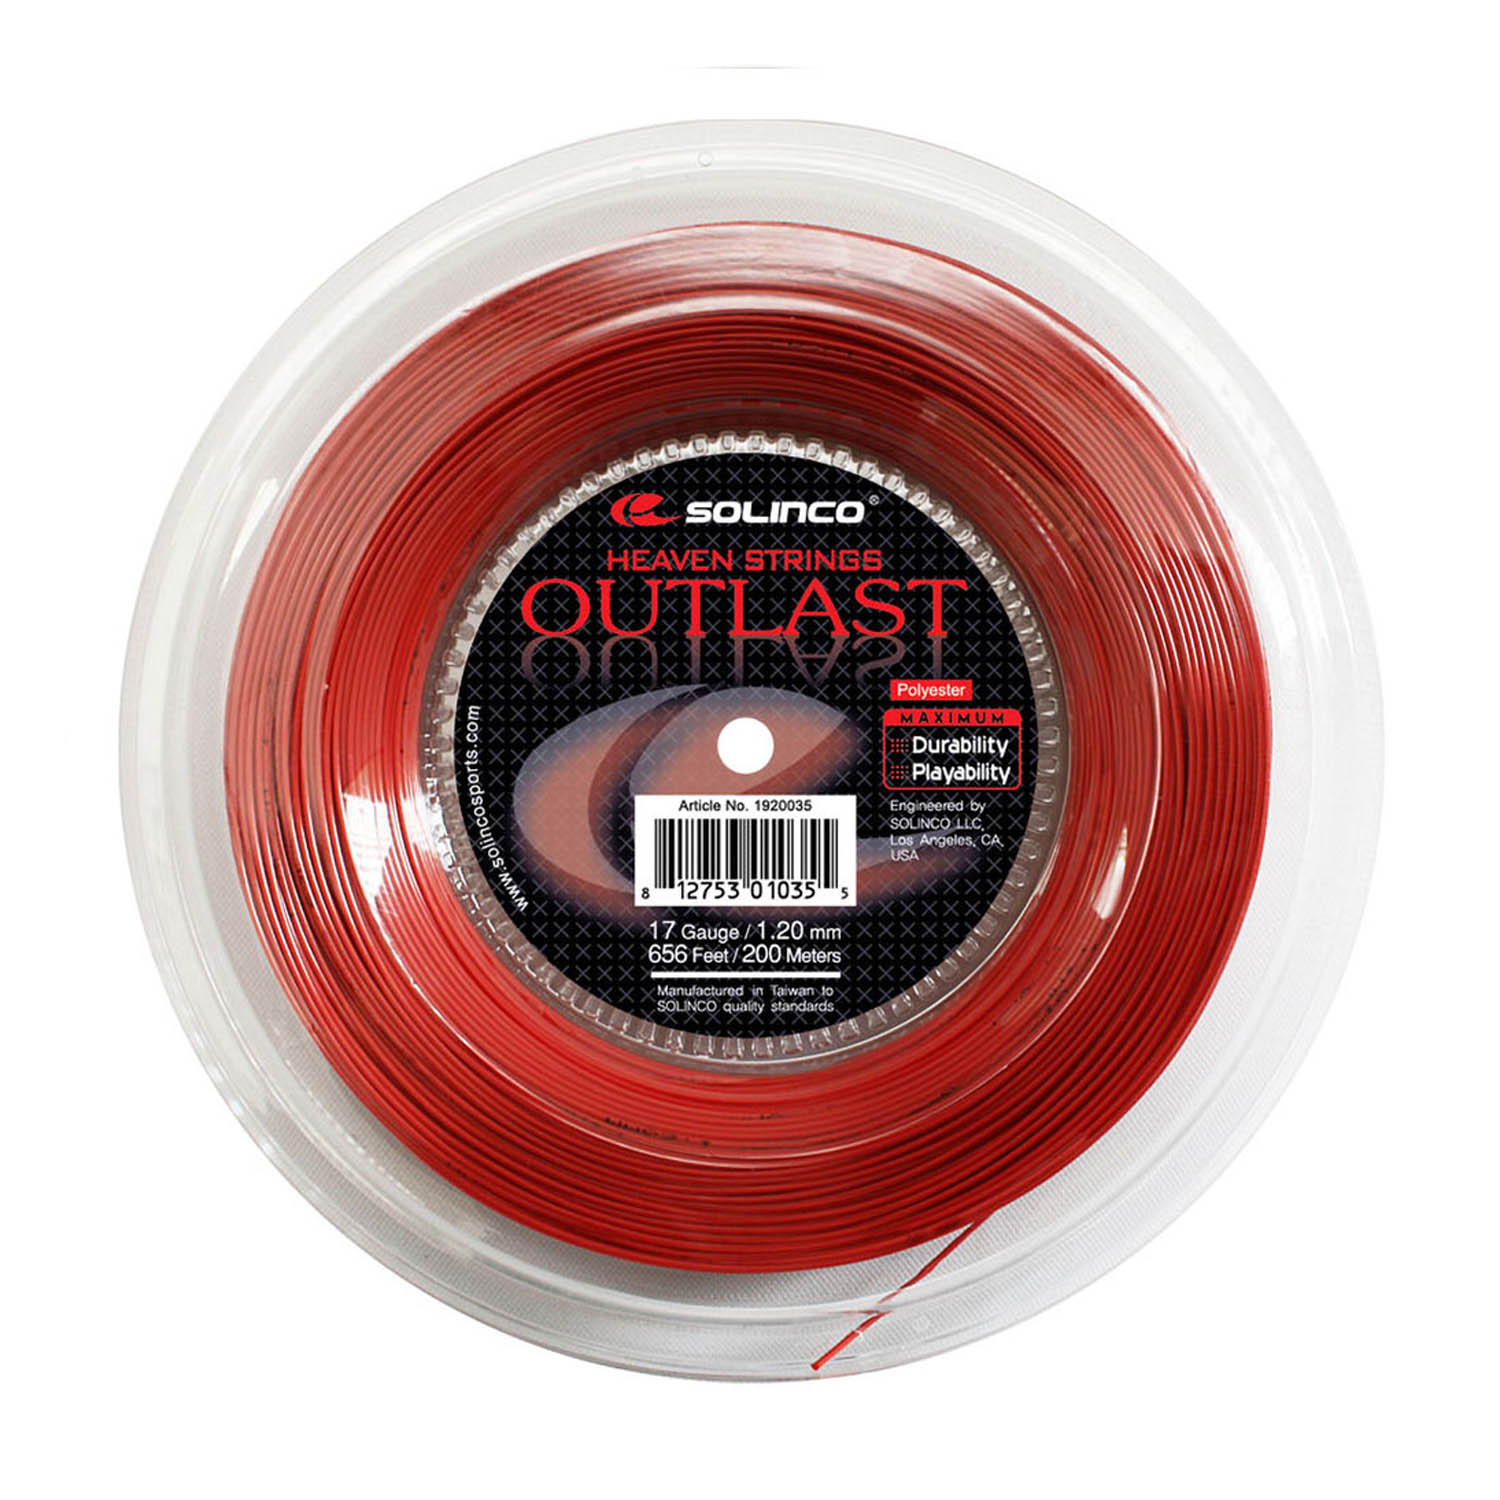 Solinco Outlast 1.20 200 m Reel - Red